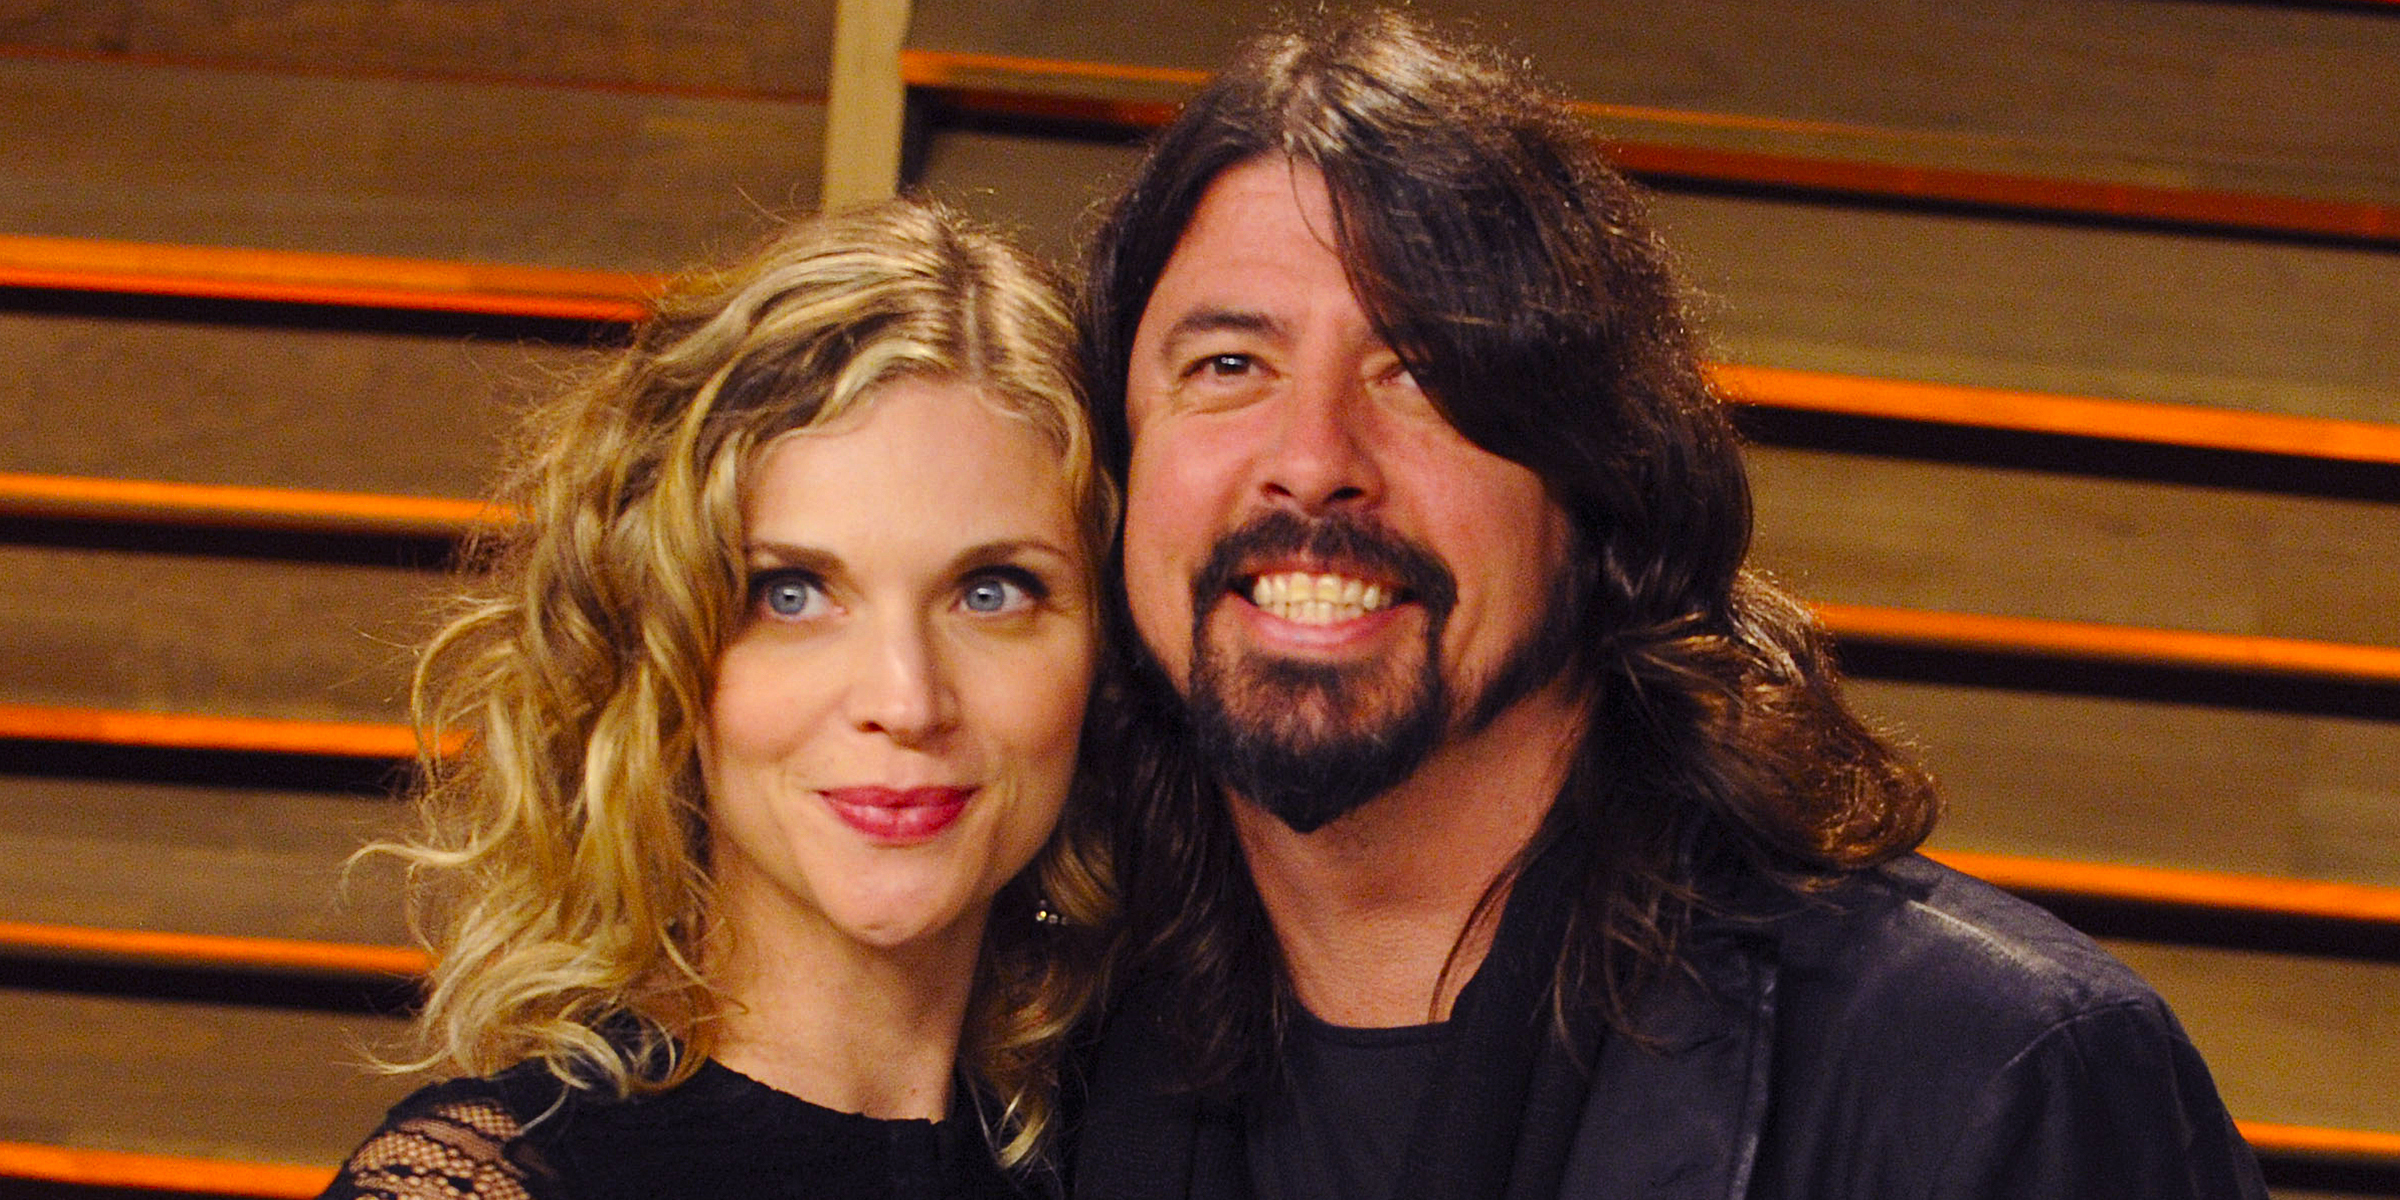 Jordyn Blum and Dave Grohl | Source: Getty Images